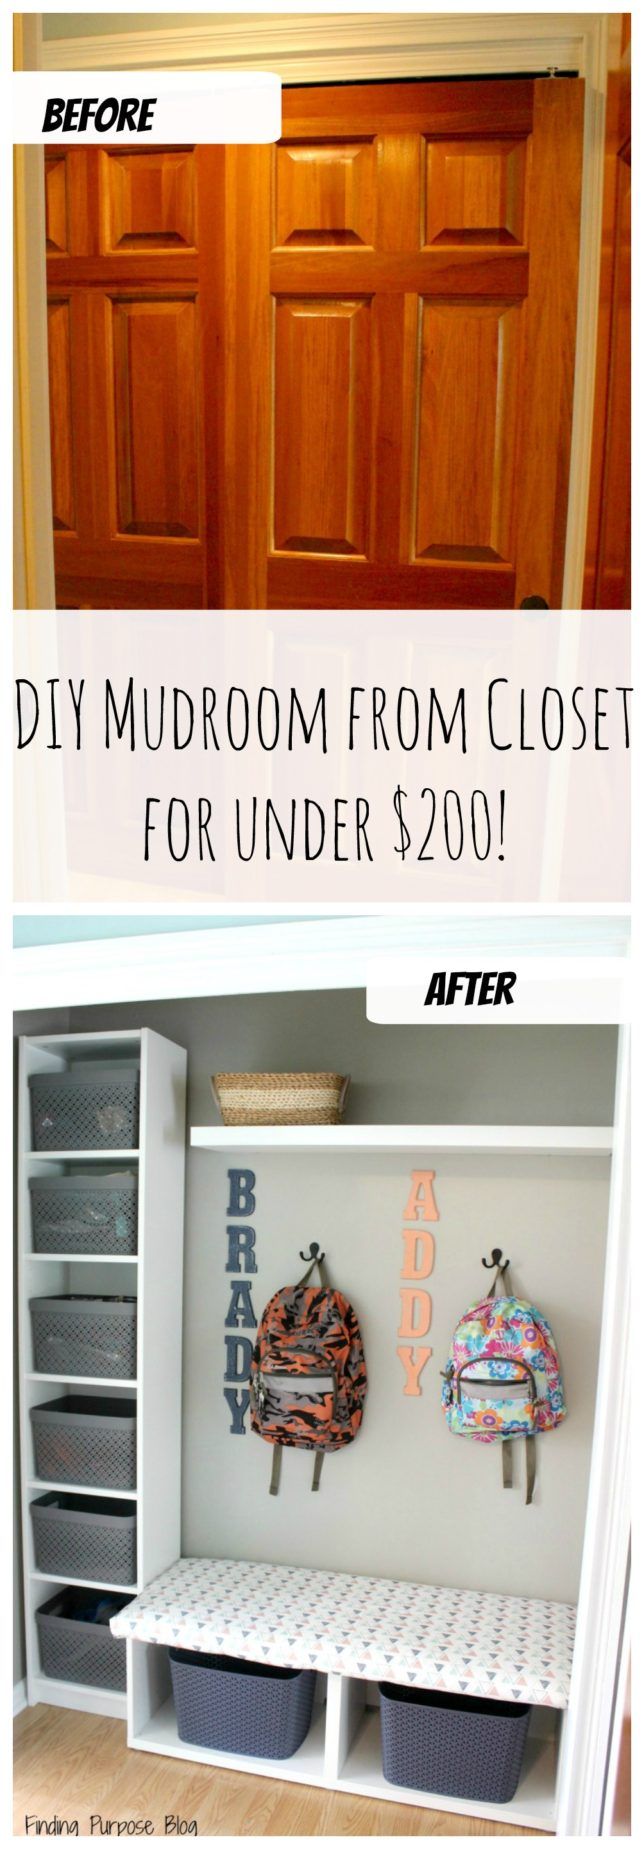 How We Turned a Closet into a Mudroom for under $200